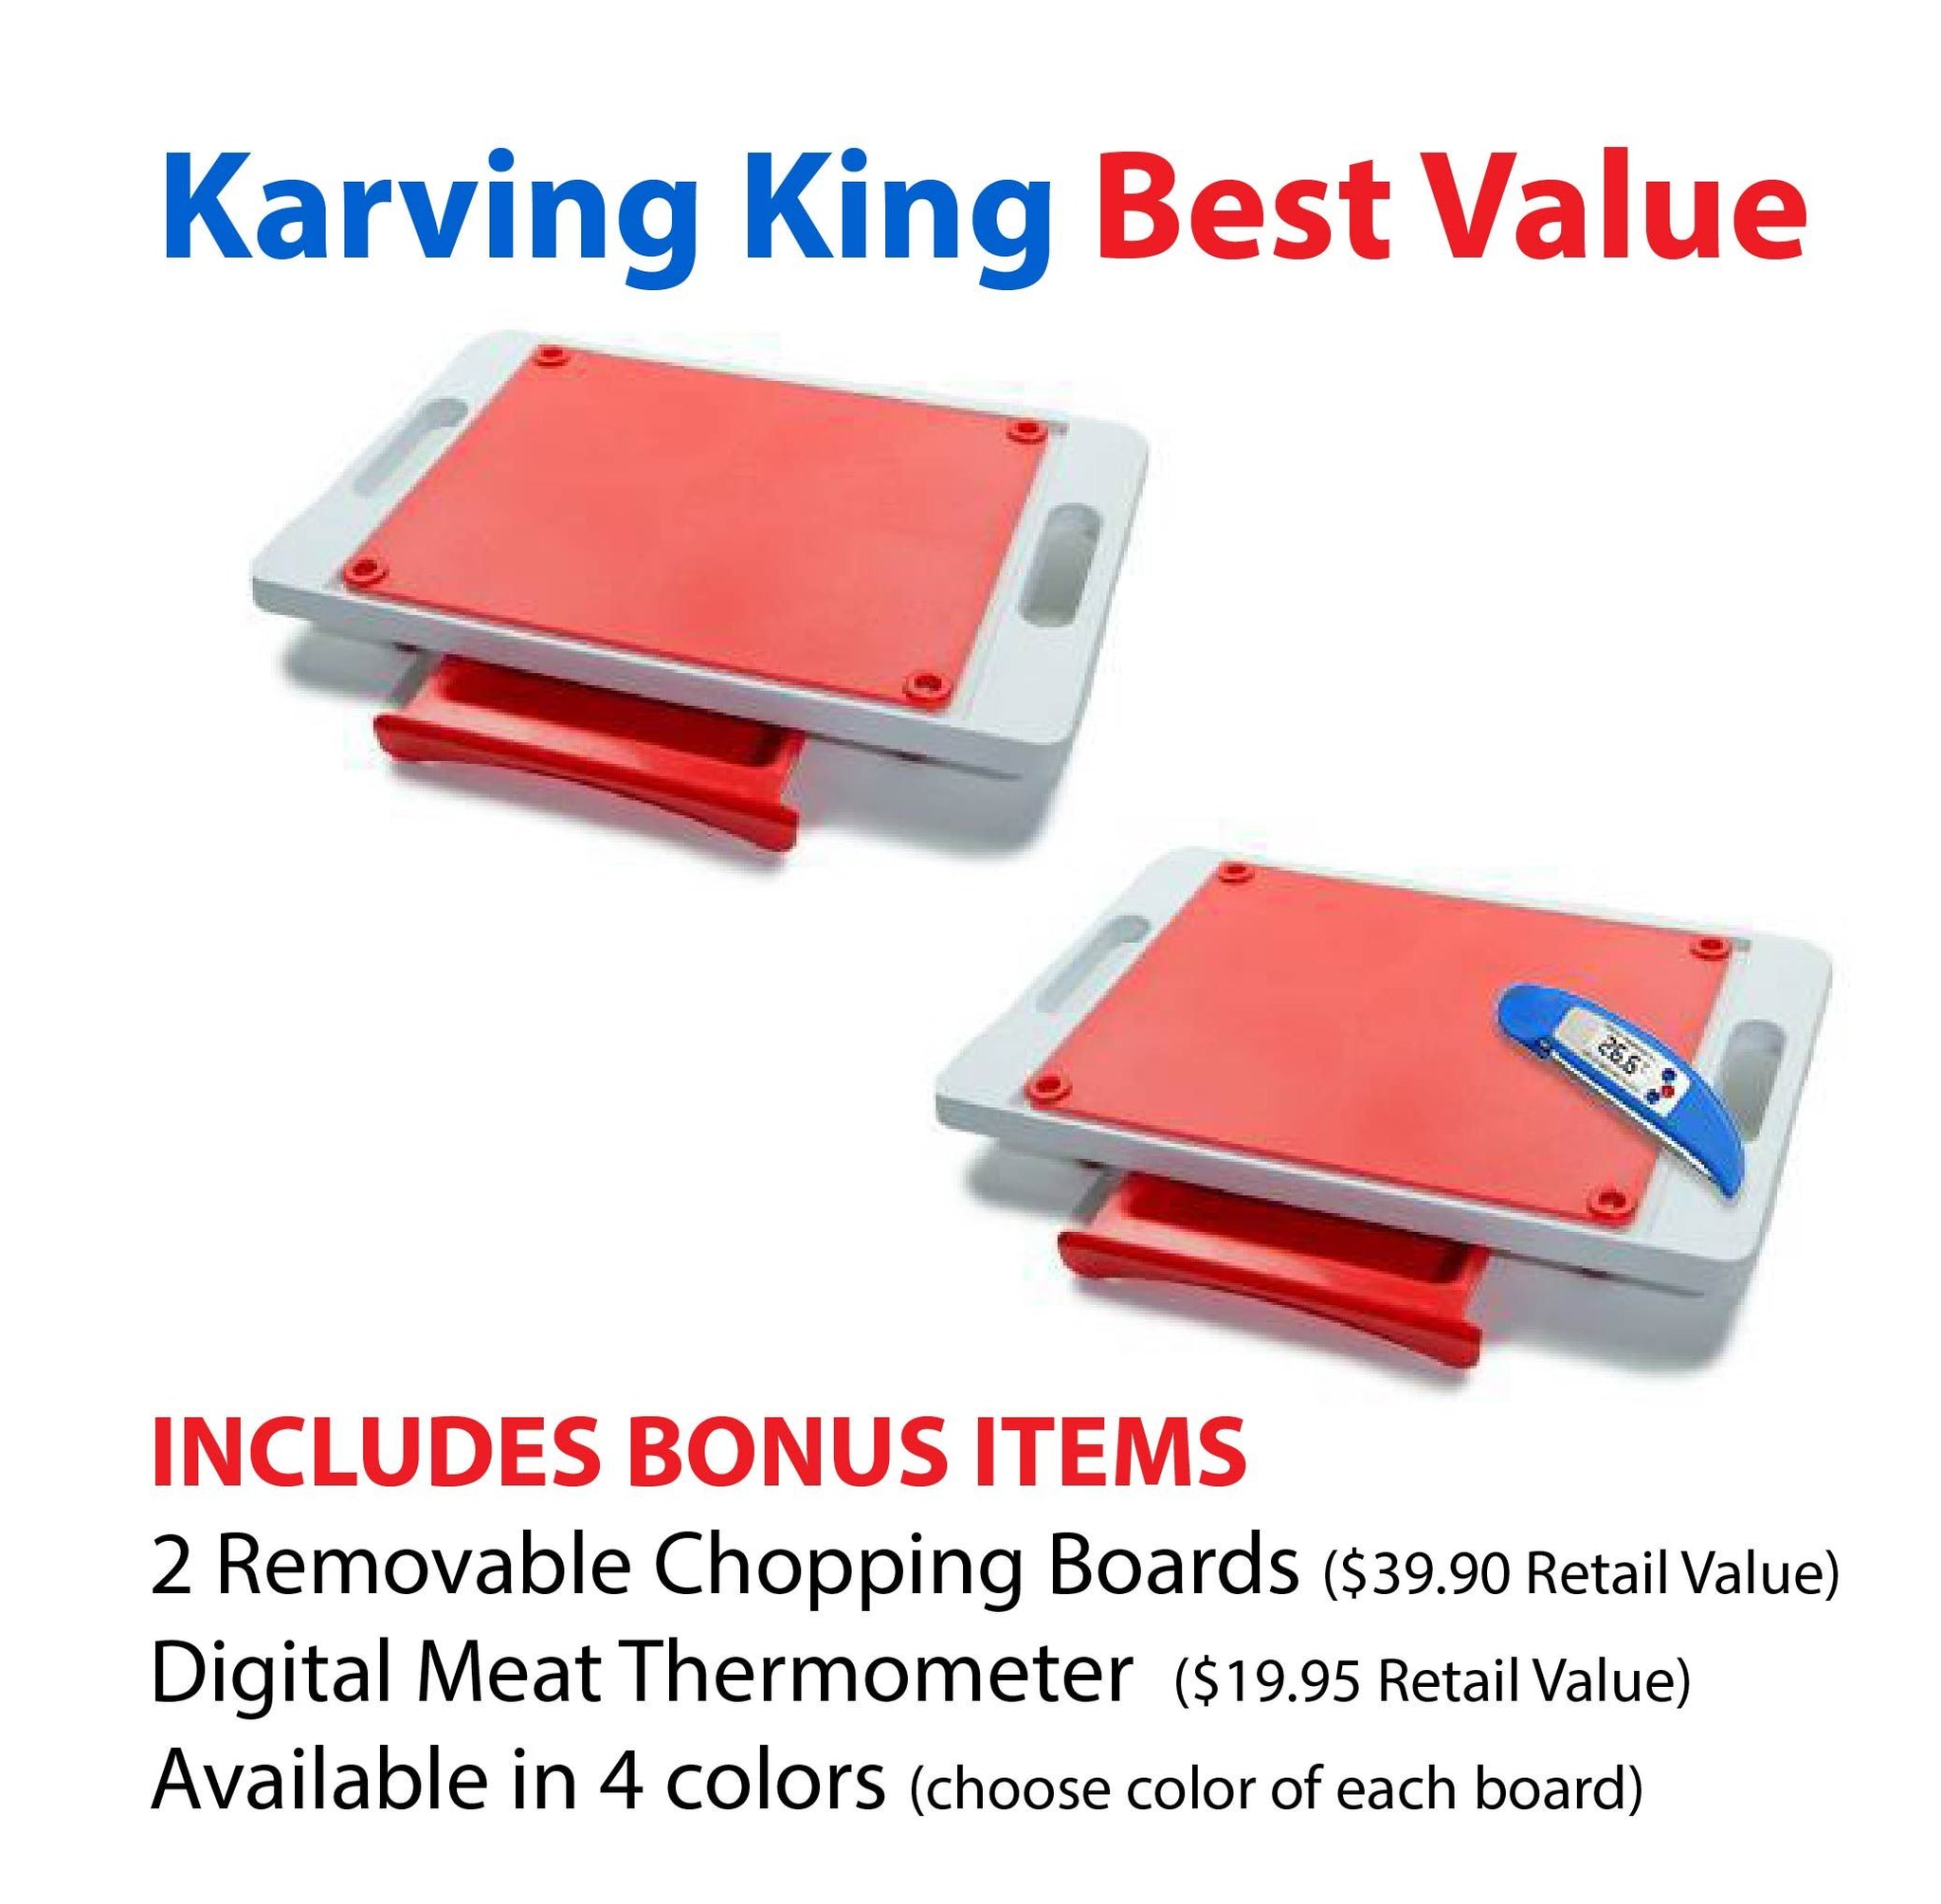 Set of 2 Dripless Cutting Boards 2 In 1 System With Digital Meat Thermometer